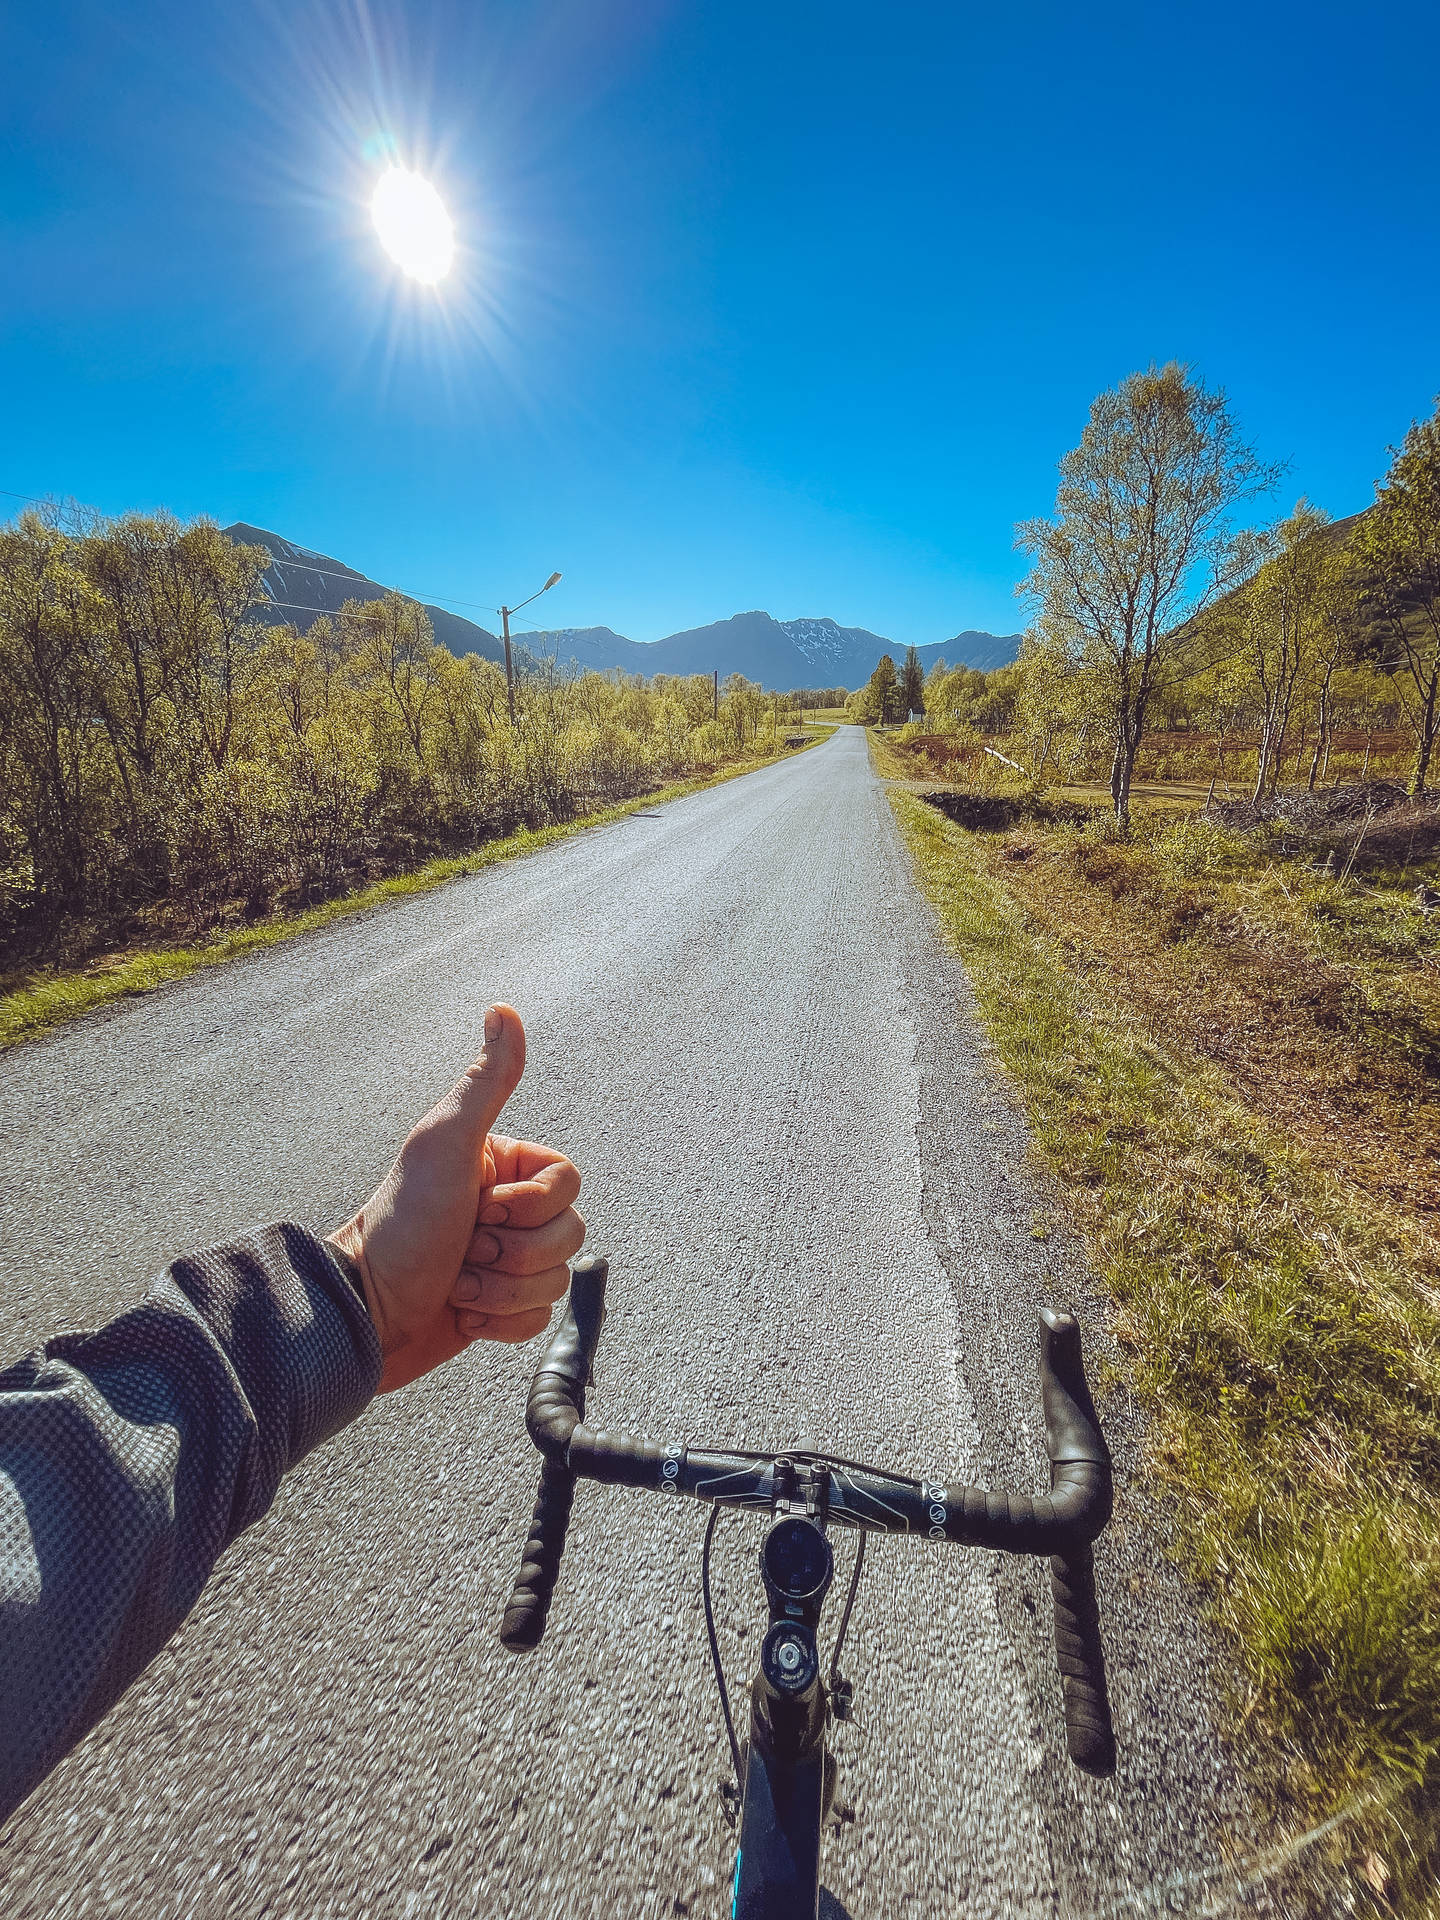 Very Good Thumbs-up While Cycling